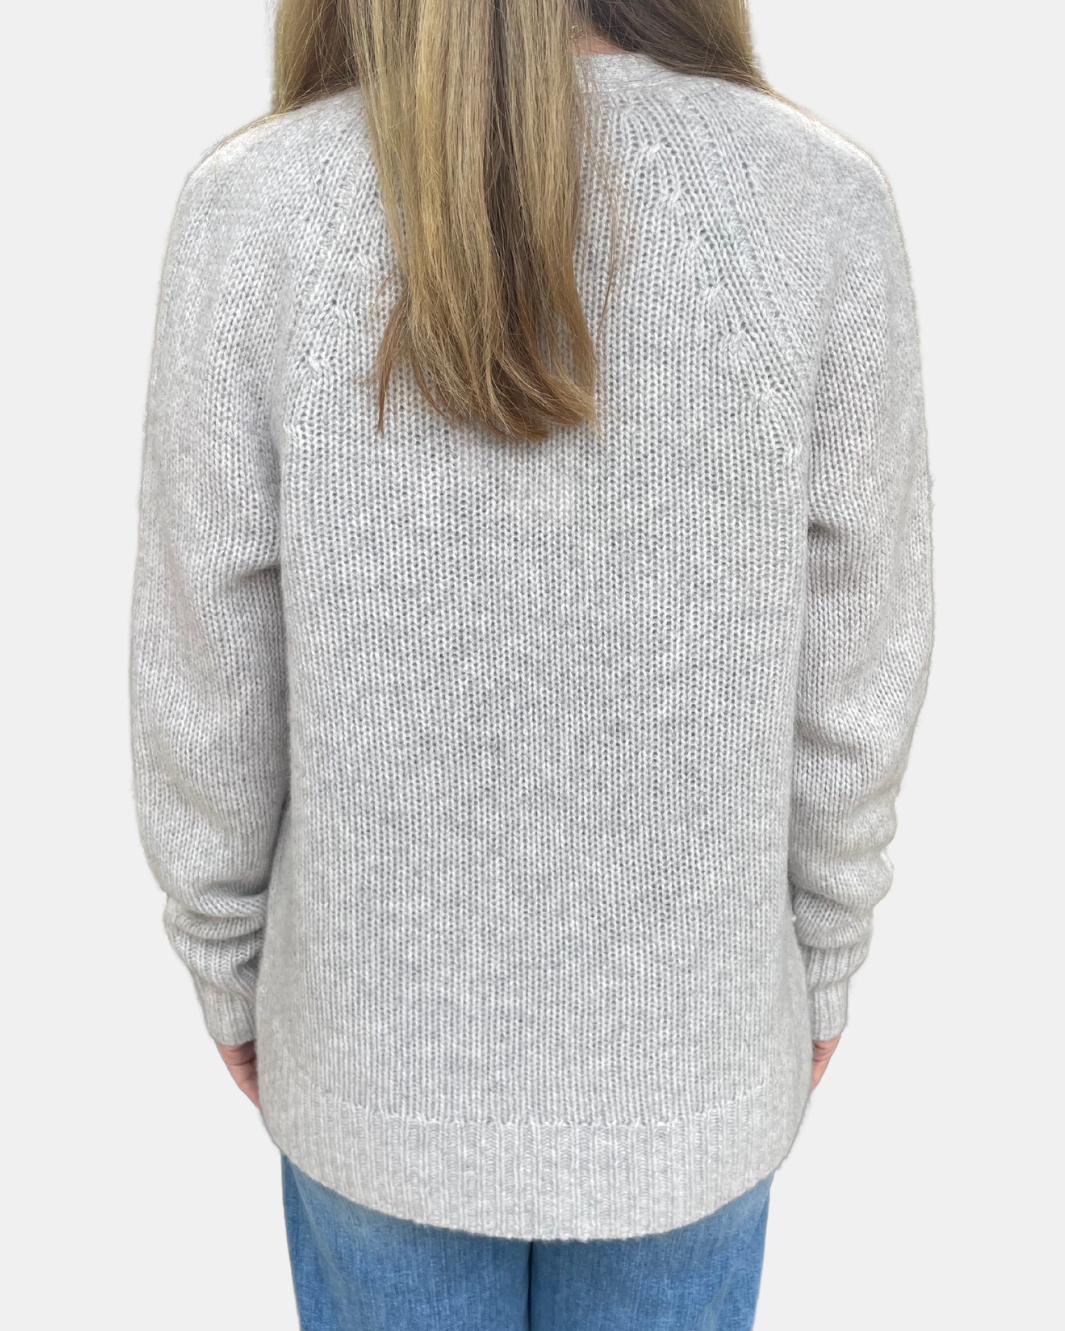 CASHMERE FEATHERWEIGHT OPEN CARDI IN MISTY GREY HEATHER - Romi Boutique